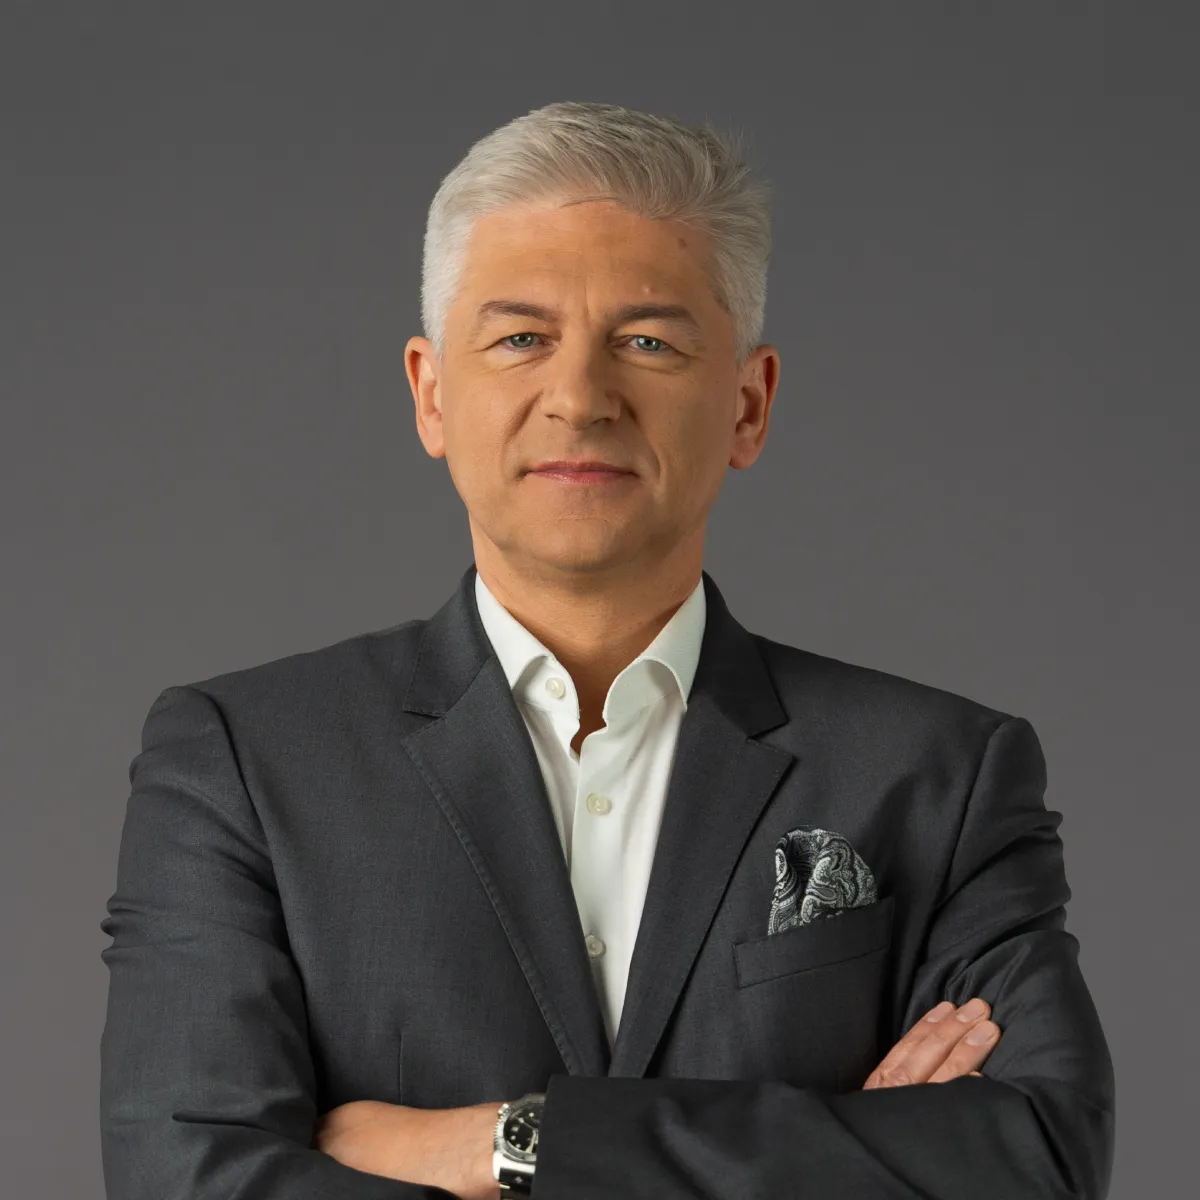 Portrait of Janusz Dziurzynski, specializing in talents and skills of the future in the business sector.